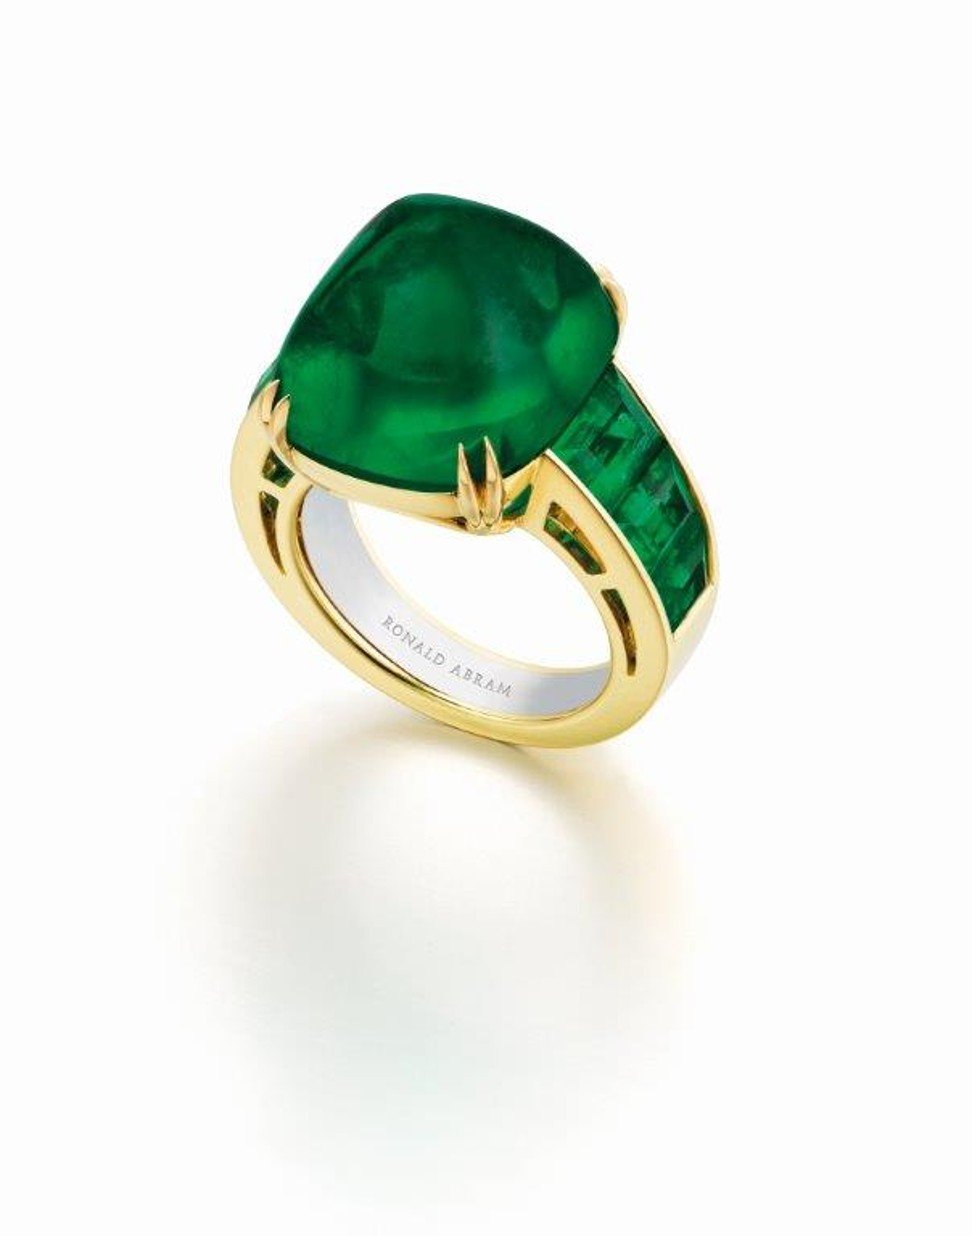 Cabochon Colombian Emerald Ring by Ronald Abram